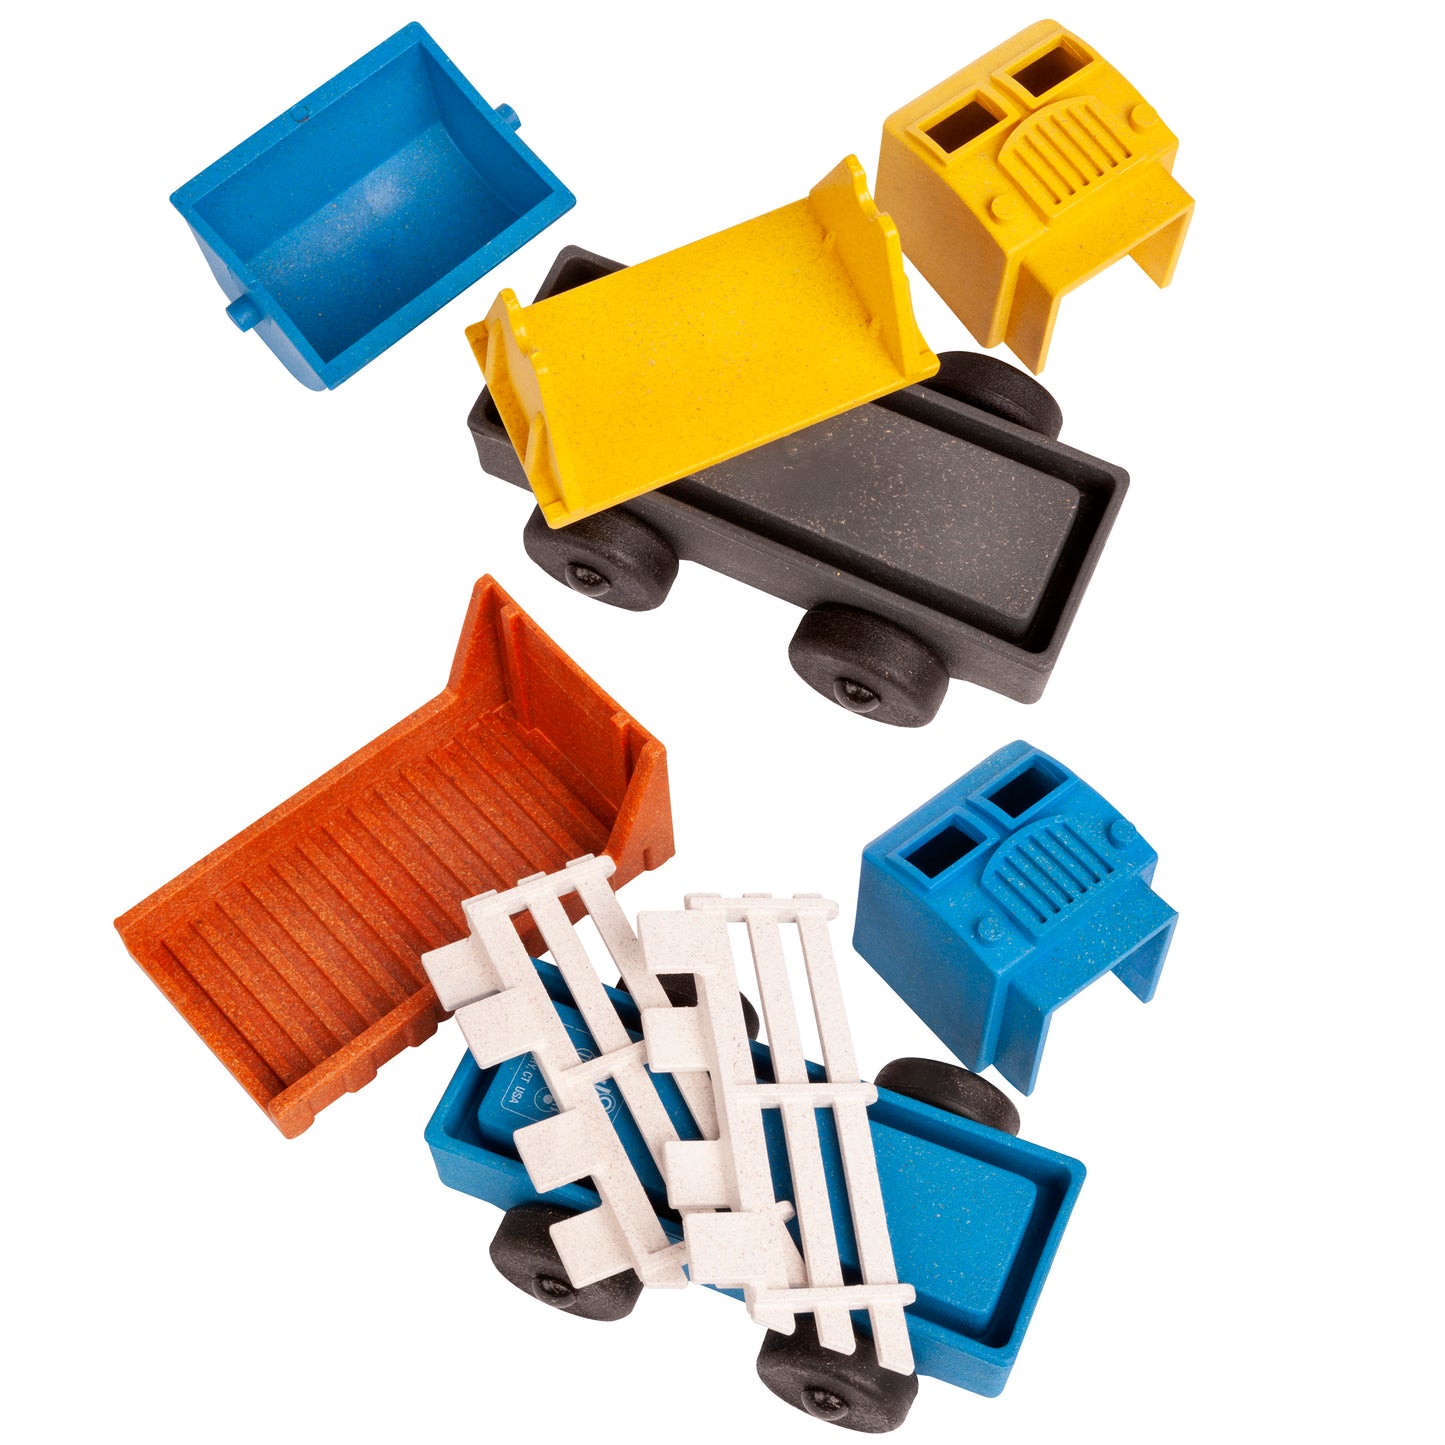 Tipper Truck Toy and Stake Truck Toy Puzzle Pieces